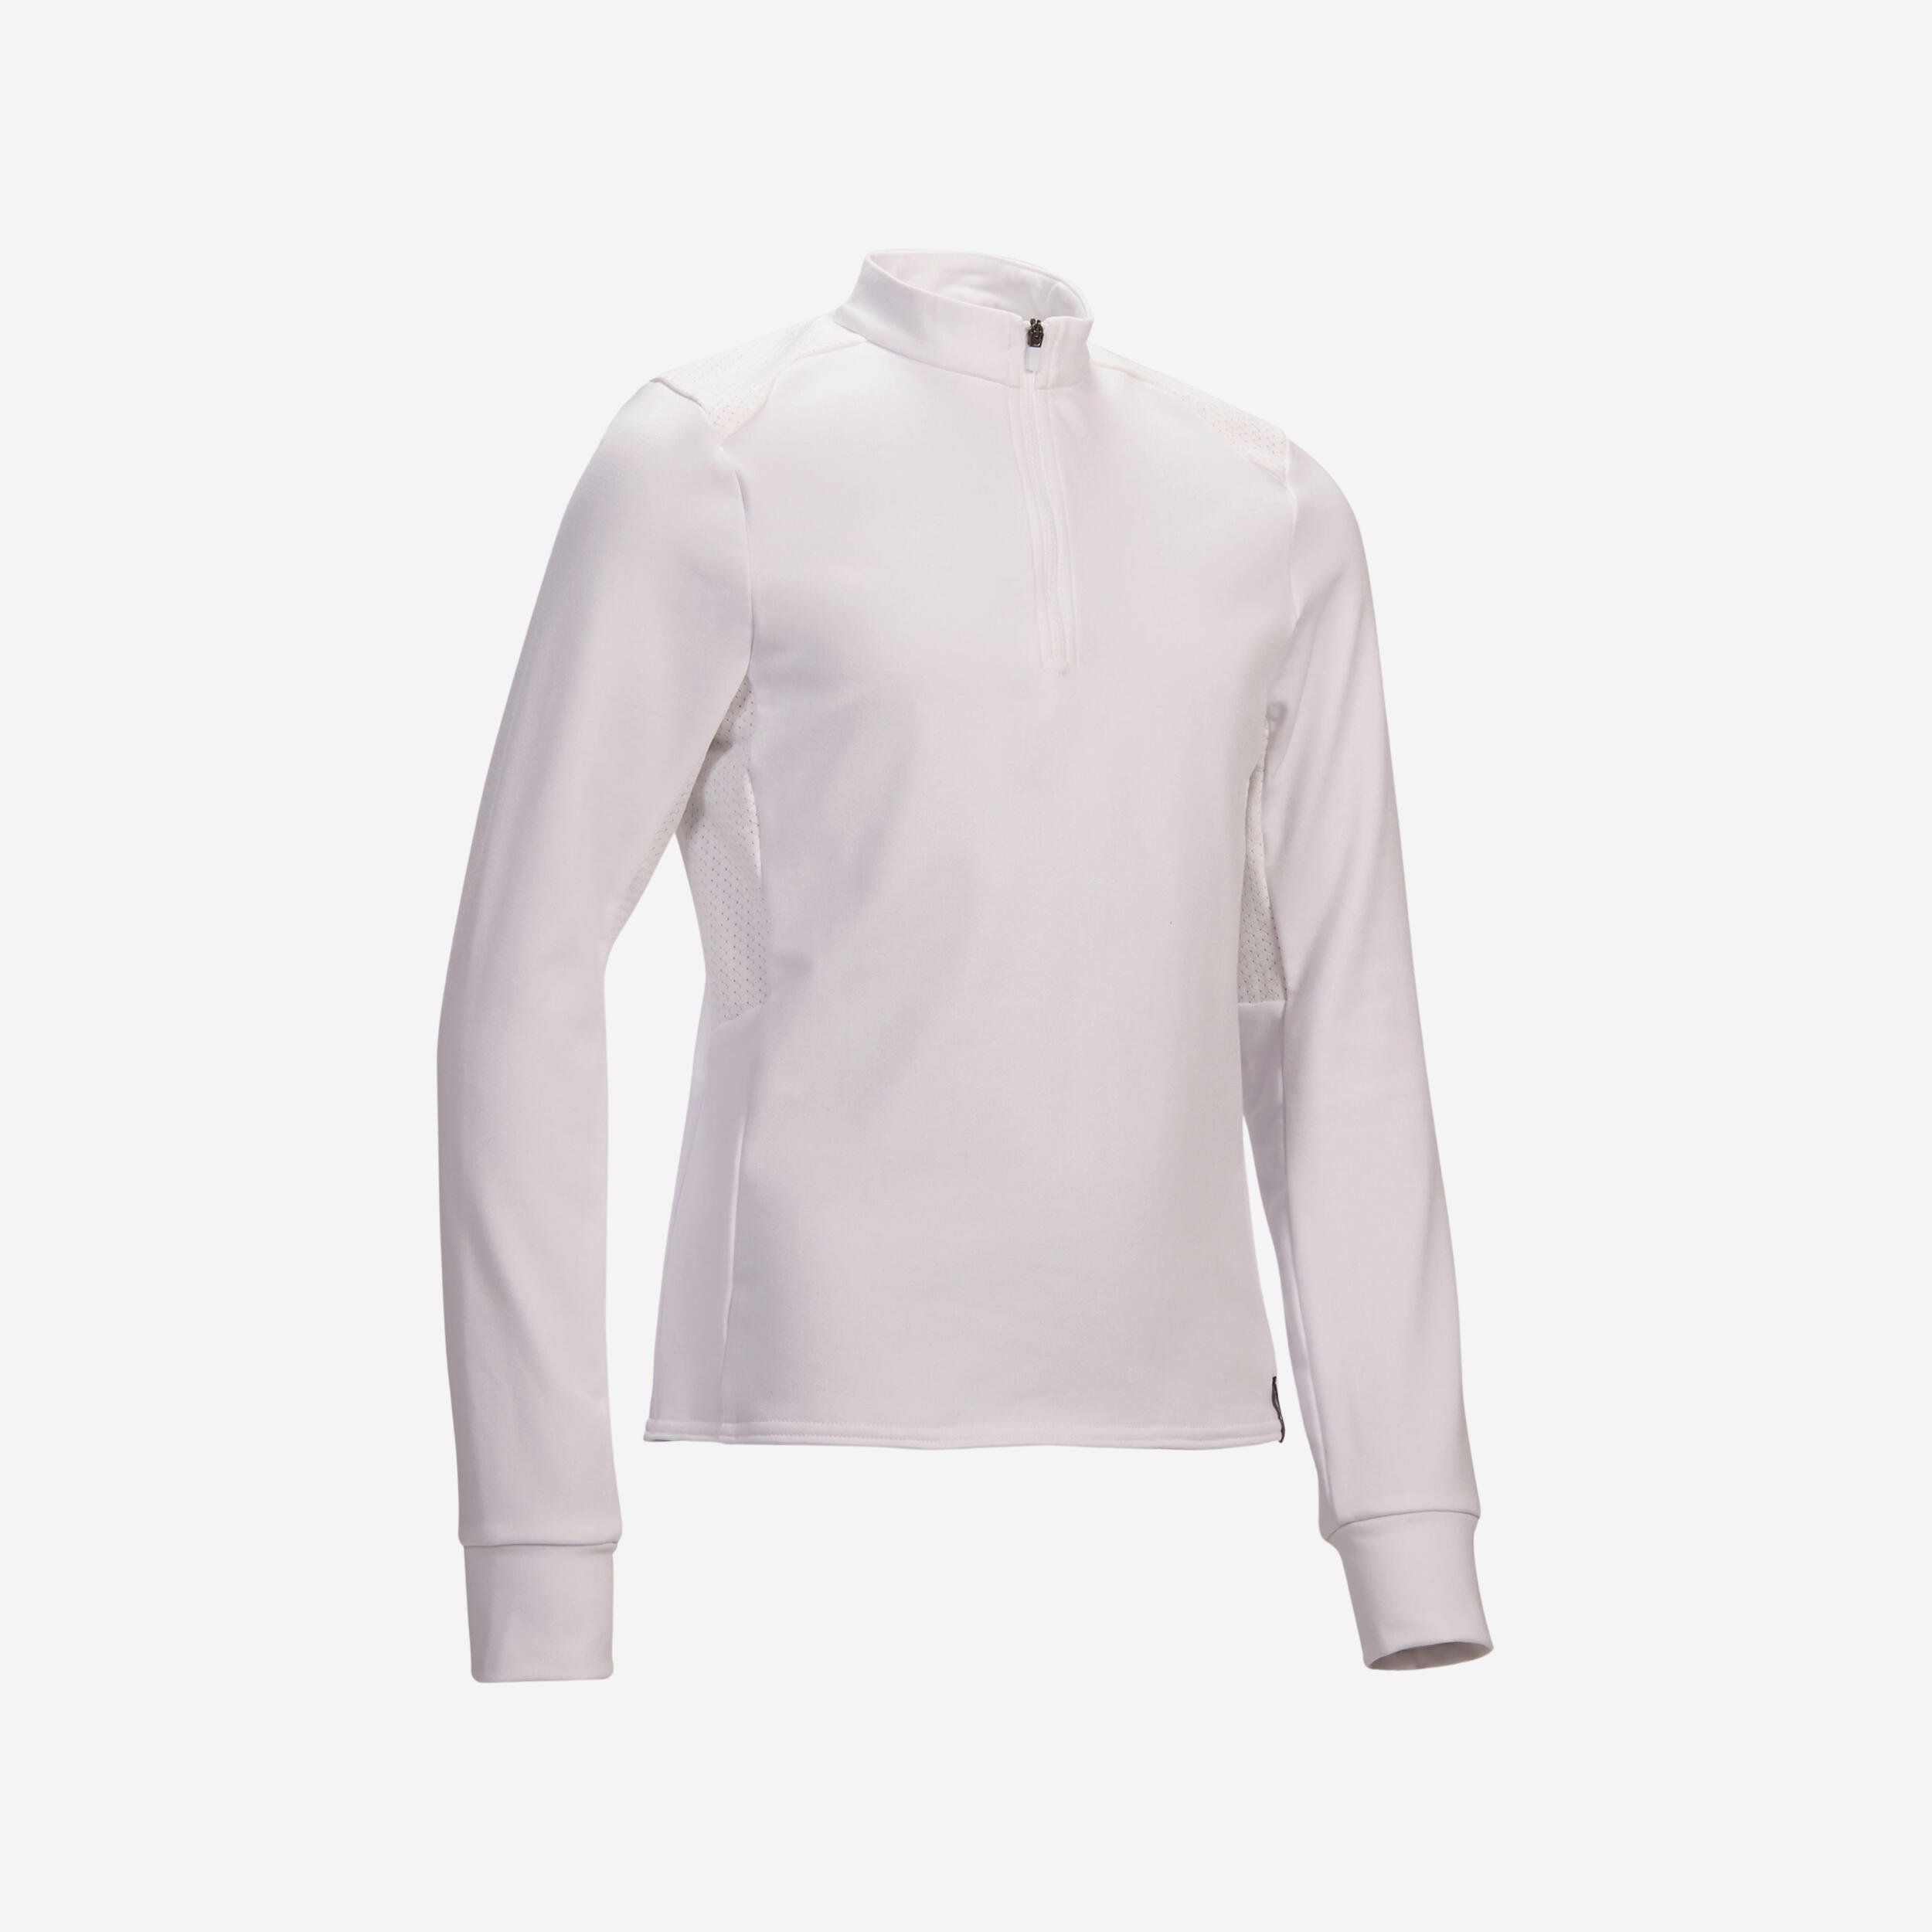 FOUGANZA Kids' Horse Riding Long-Sleeved Warm Competition Polo 500 - White